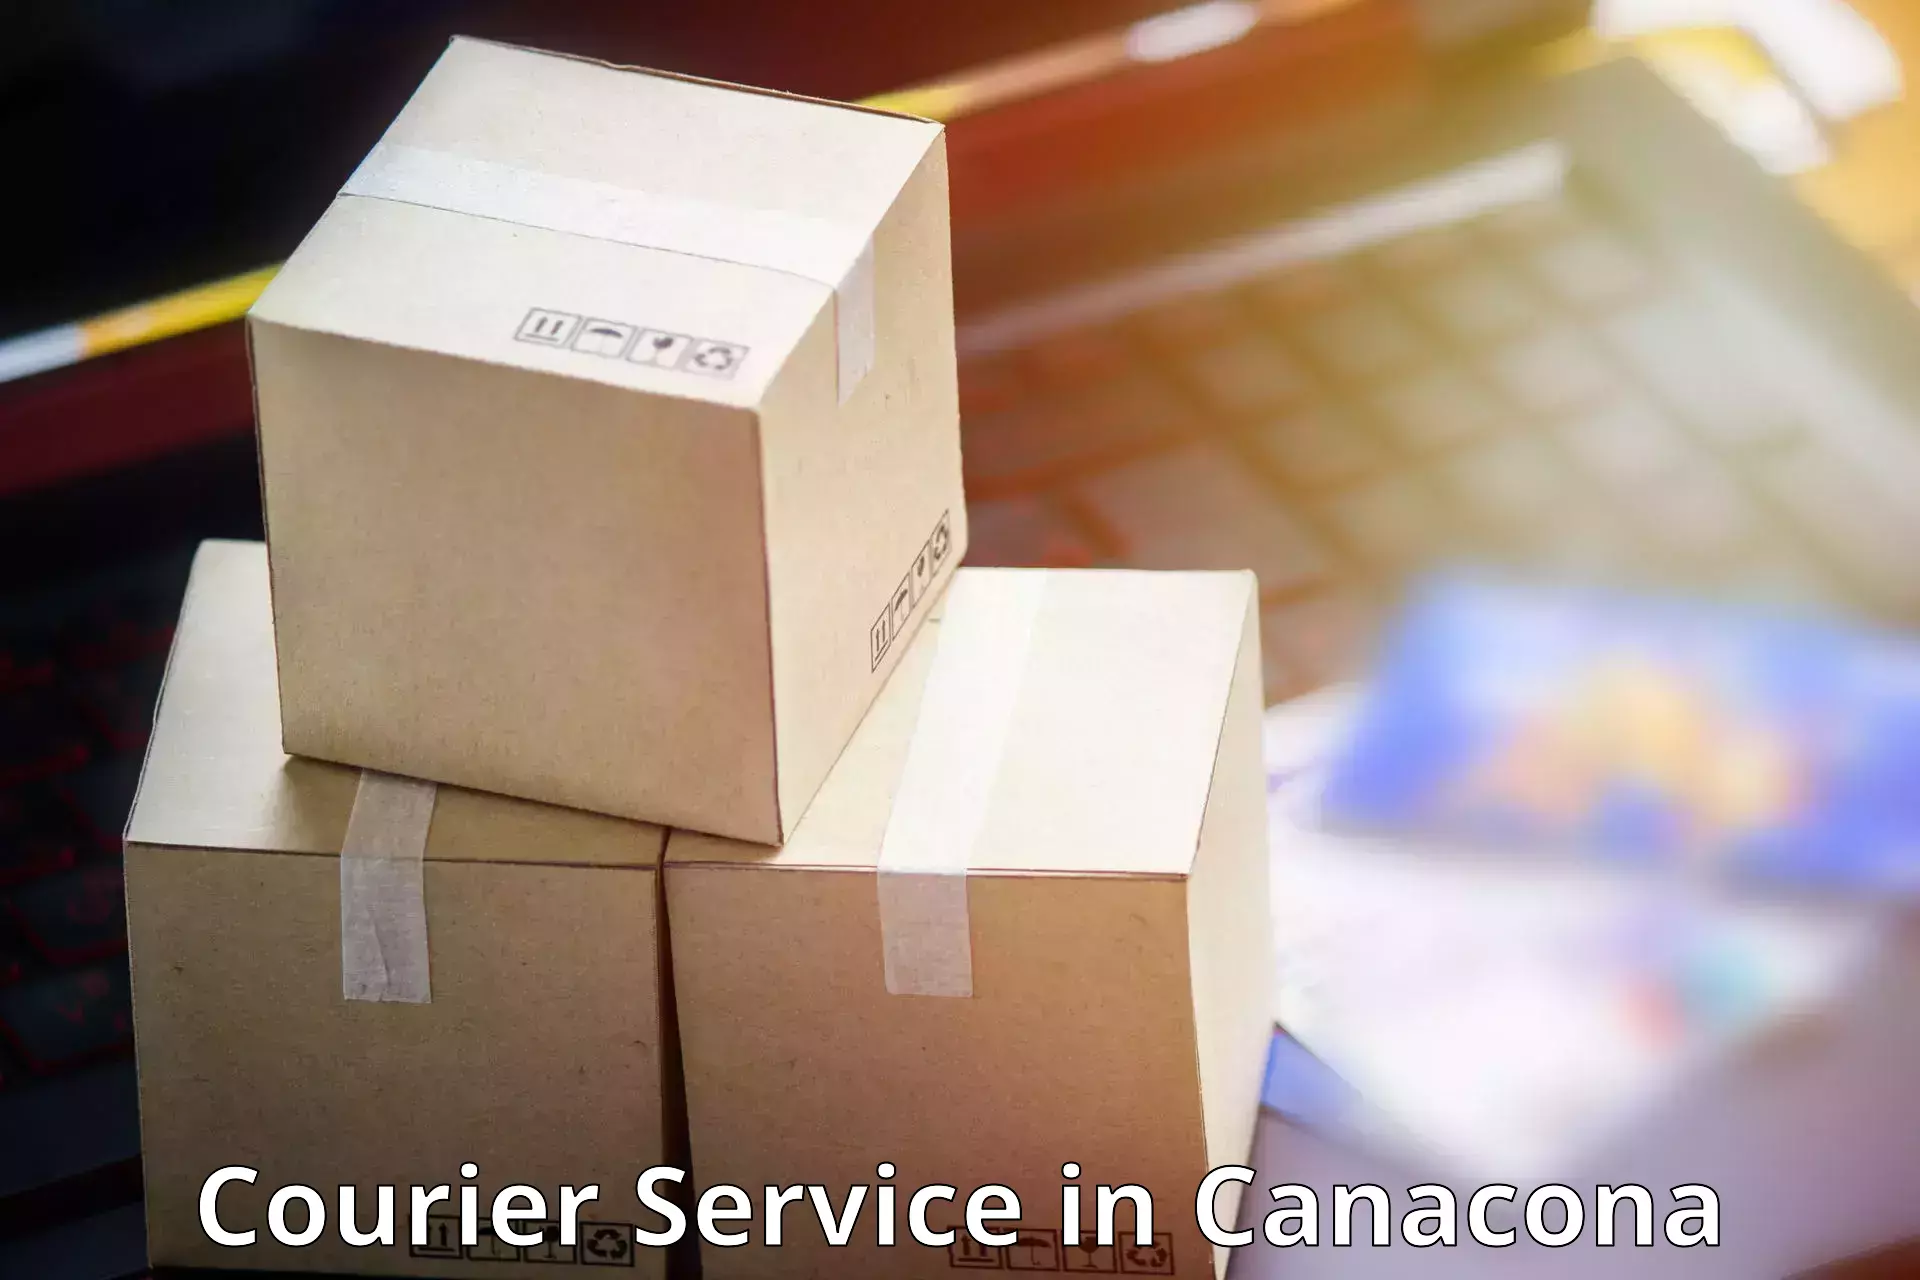 Expedited parcel delivery in Canacona